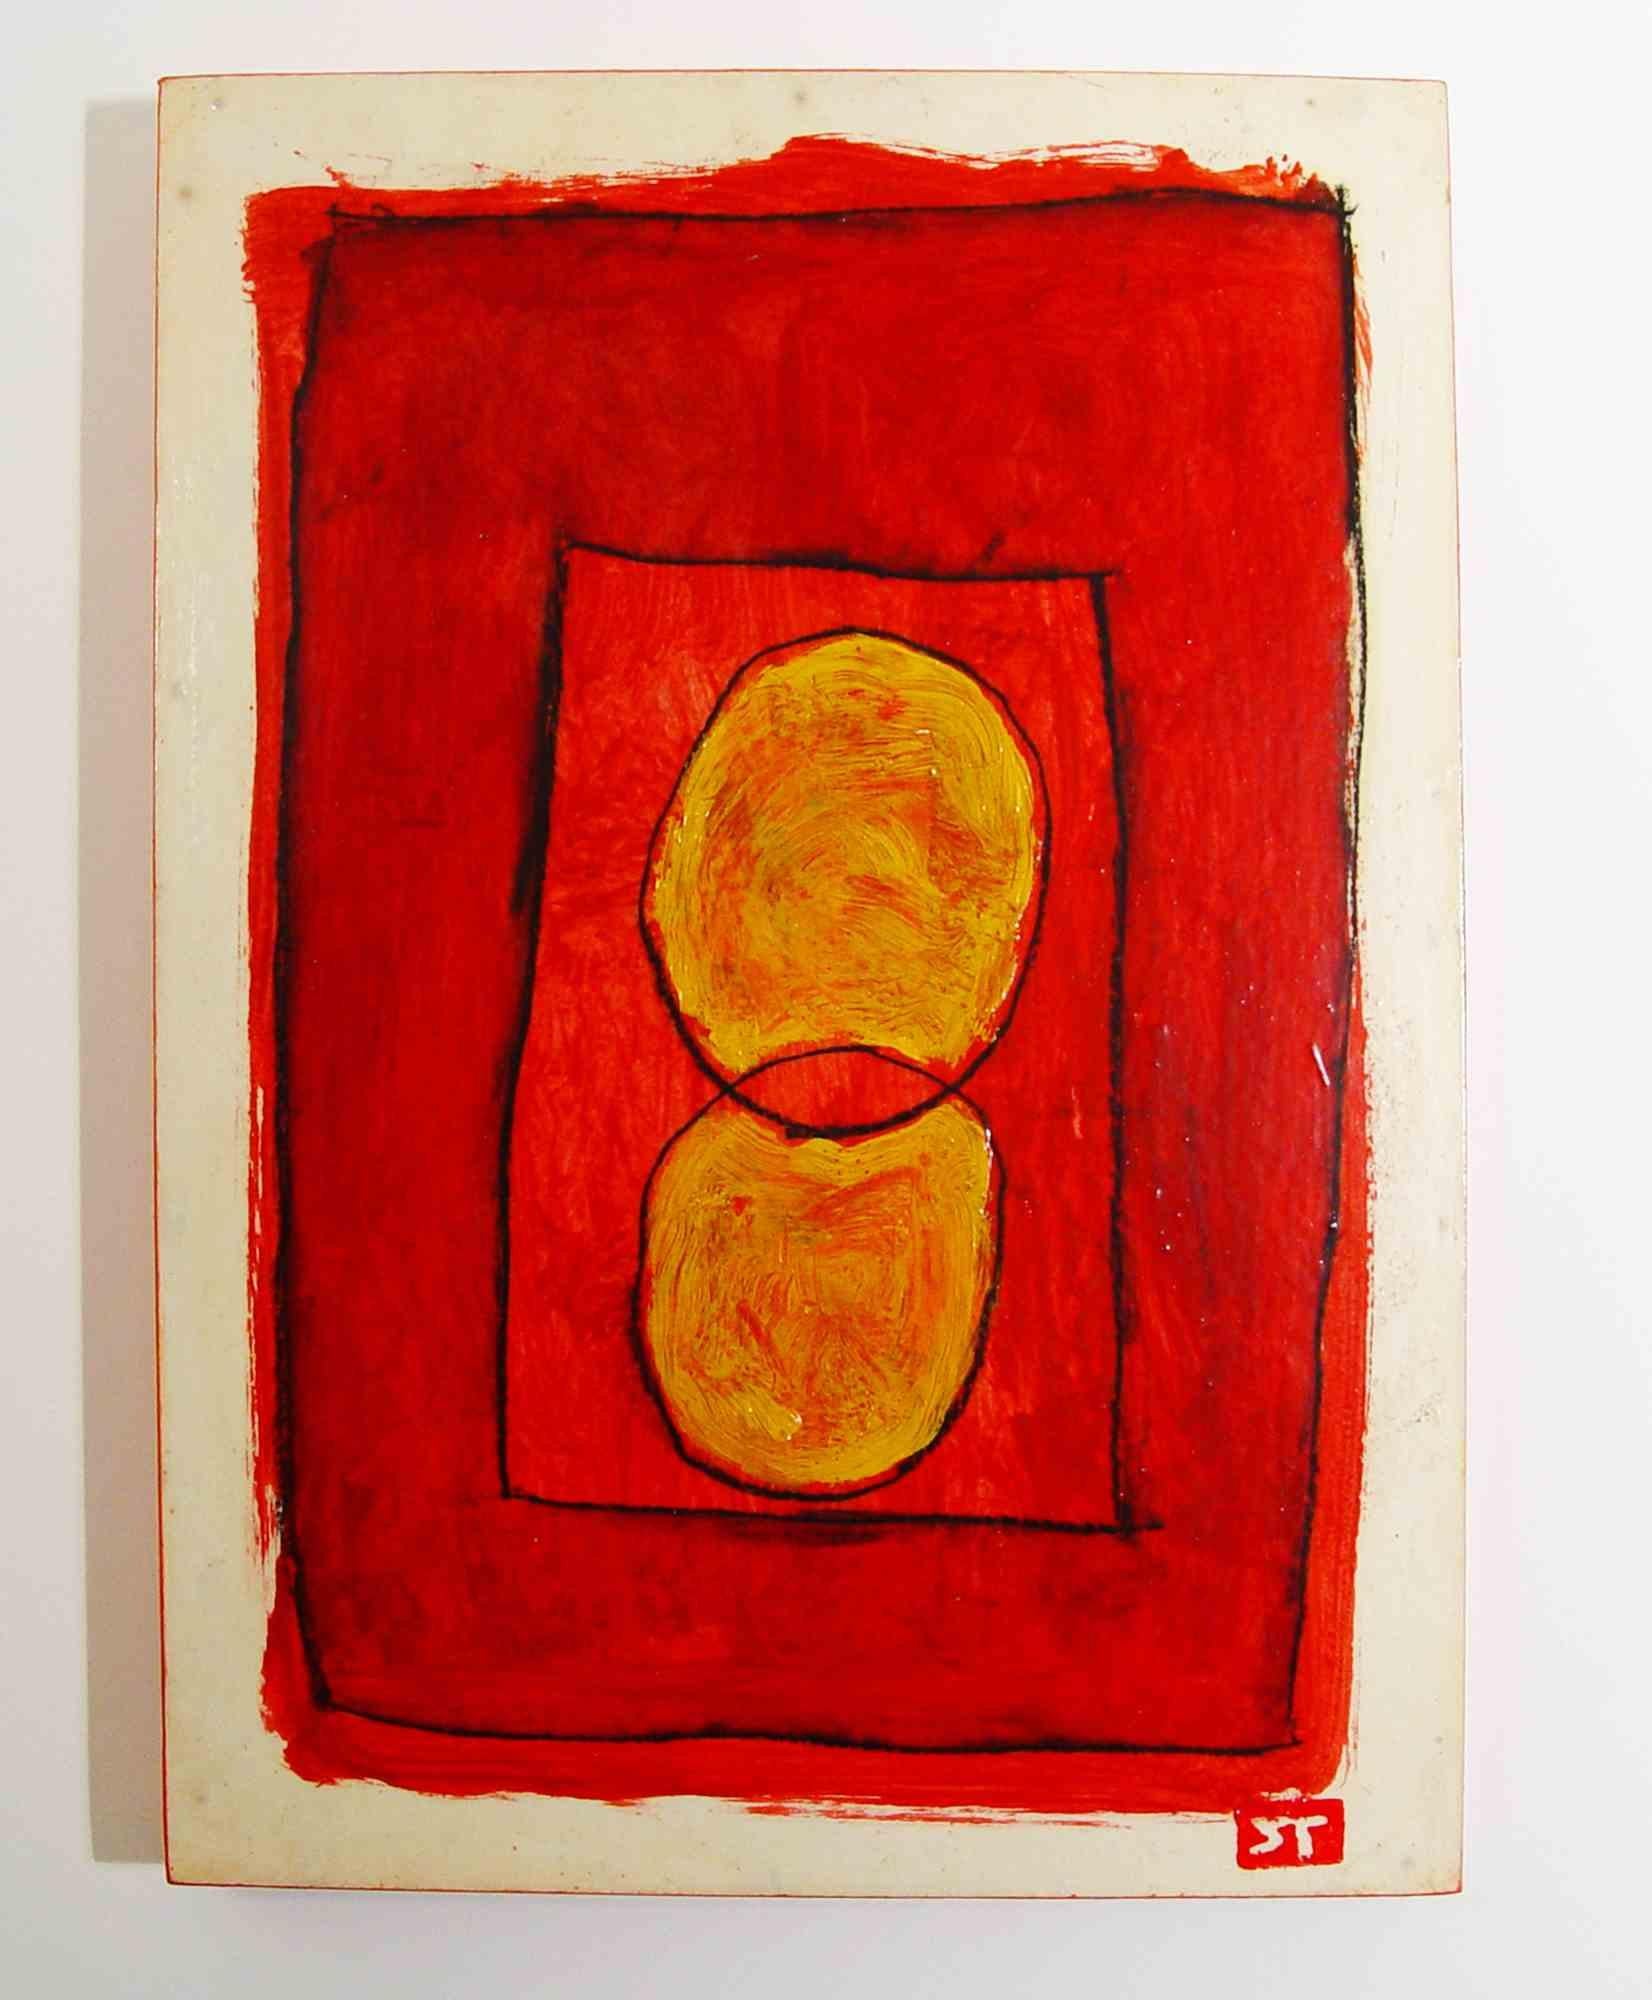 Intersections 5 is an original painting realized by the Italian artist Salvatore Travascio in the 2010s.

This is a beautiful oil painting on paper on wooden support. Hand-signed on the lower right. Perfect conditions.

What has motivated the artist